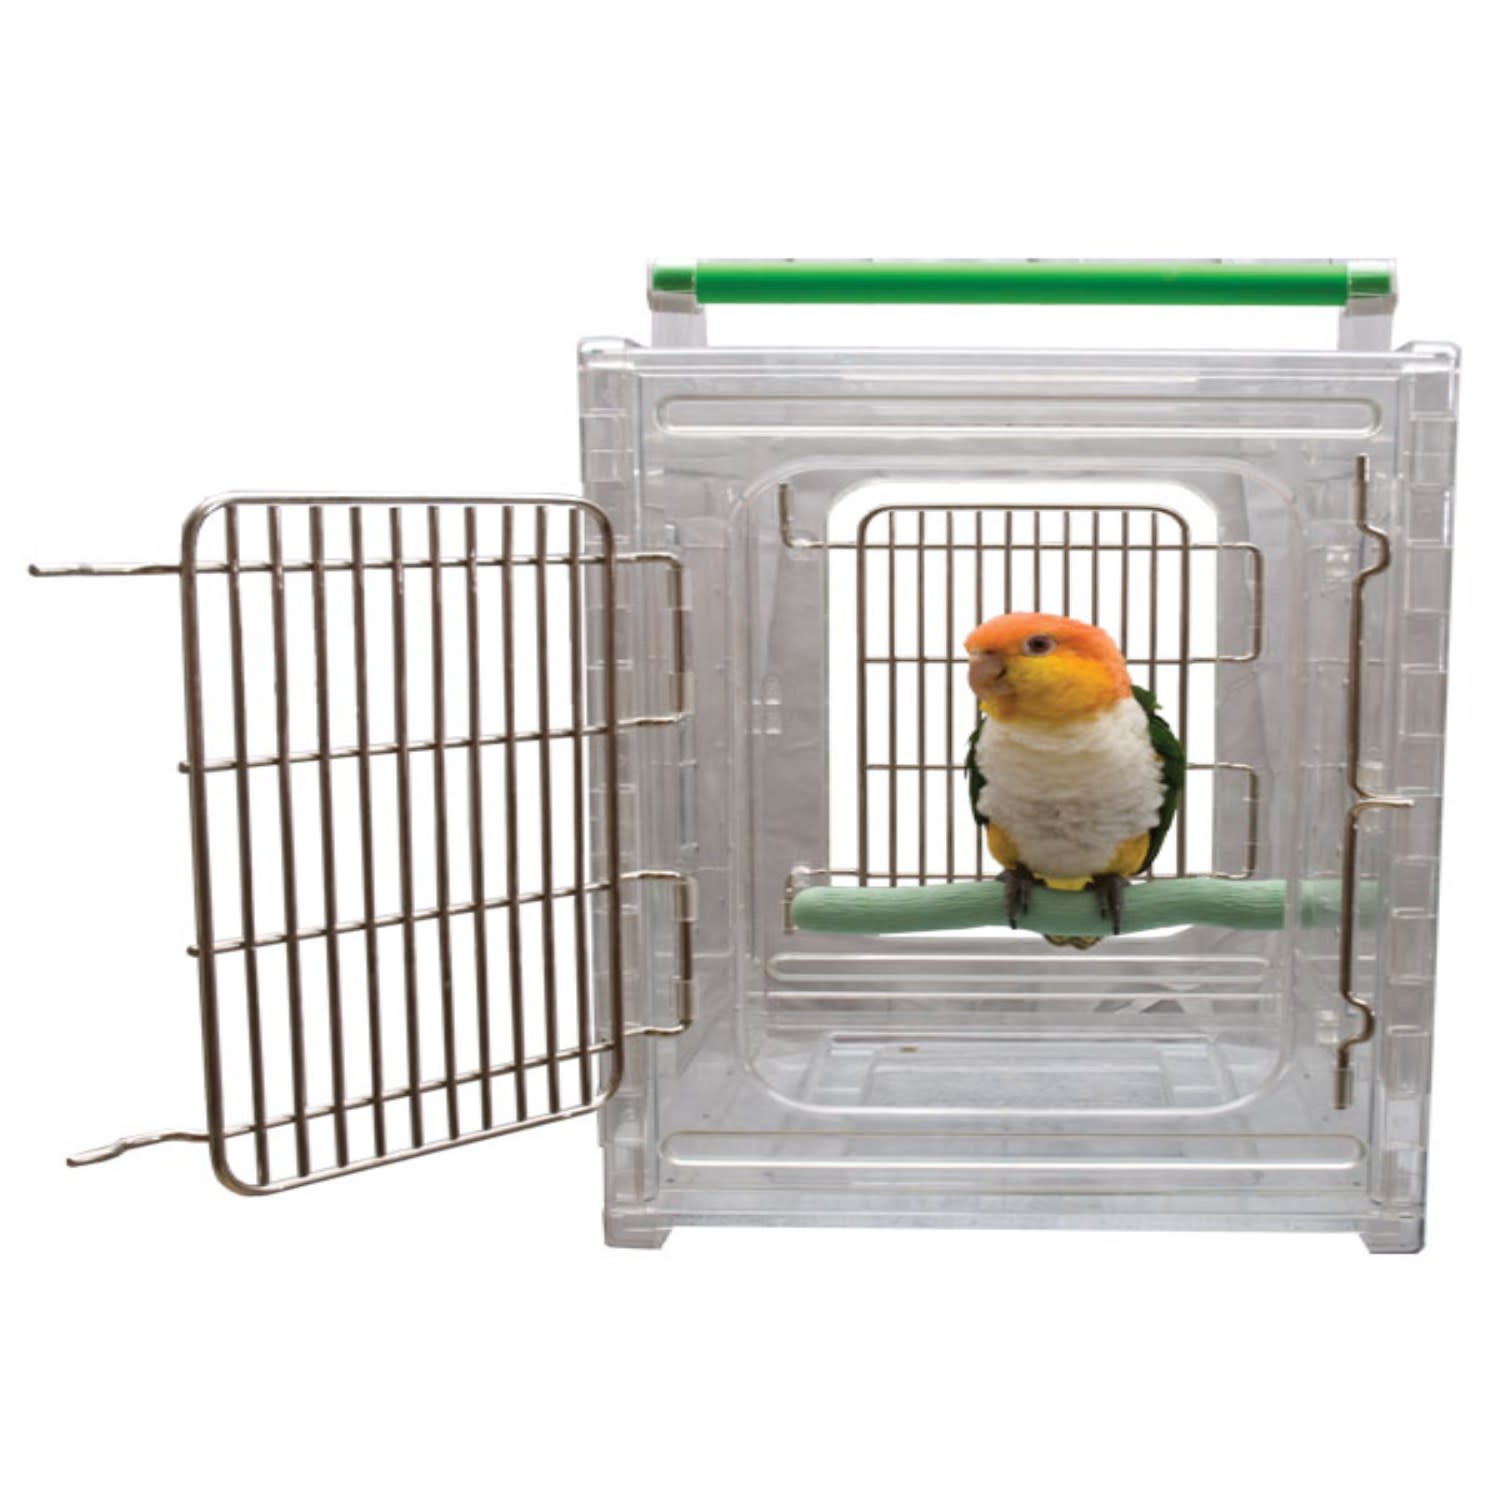 Parrot Pet Bird Macaw Travel Cage Carrier See Through Panels 